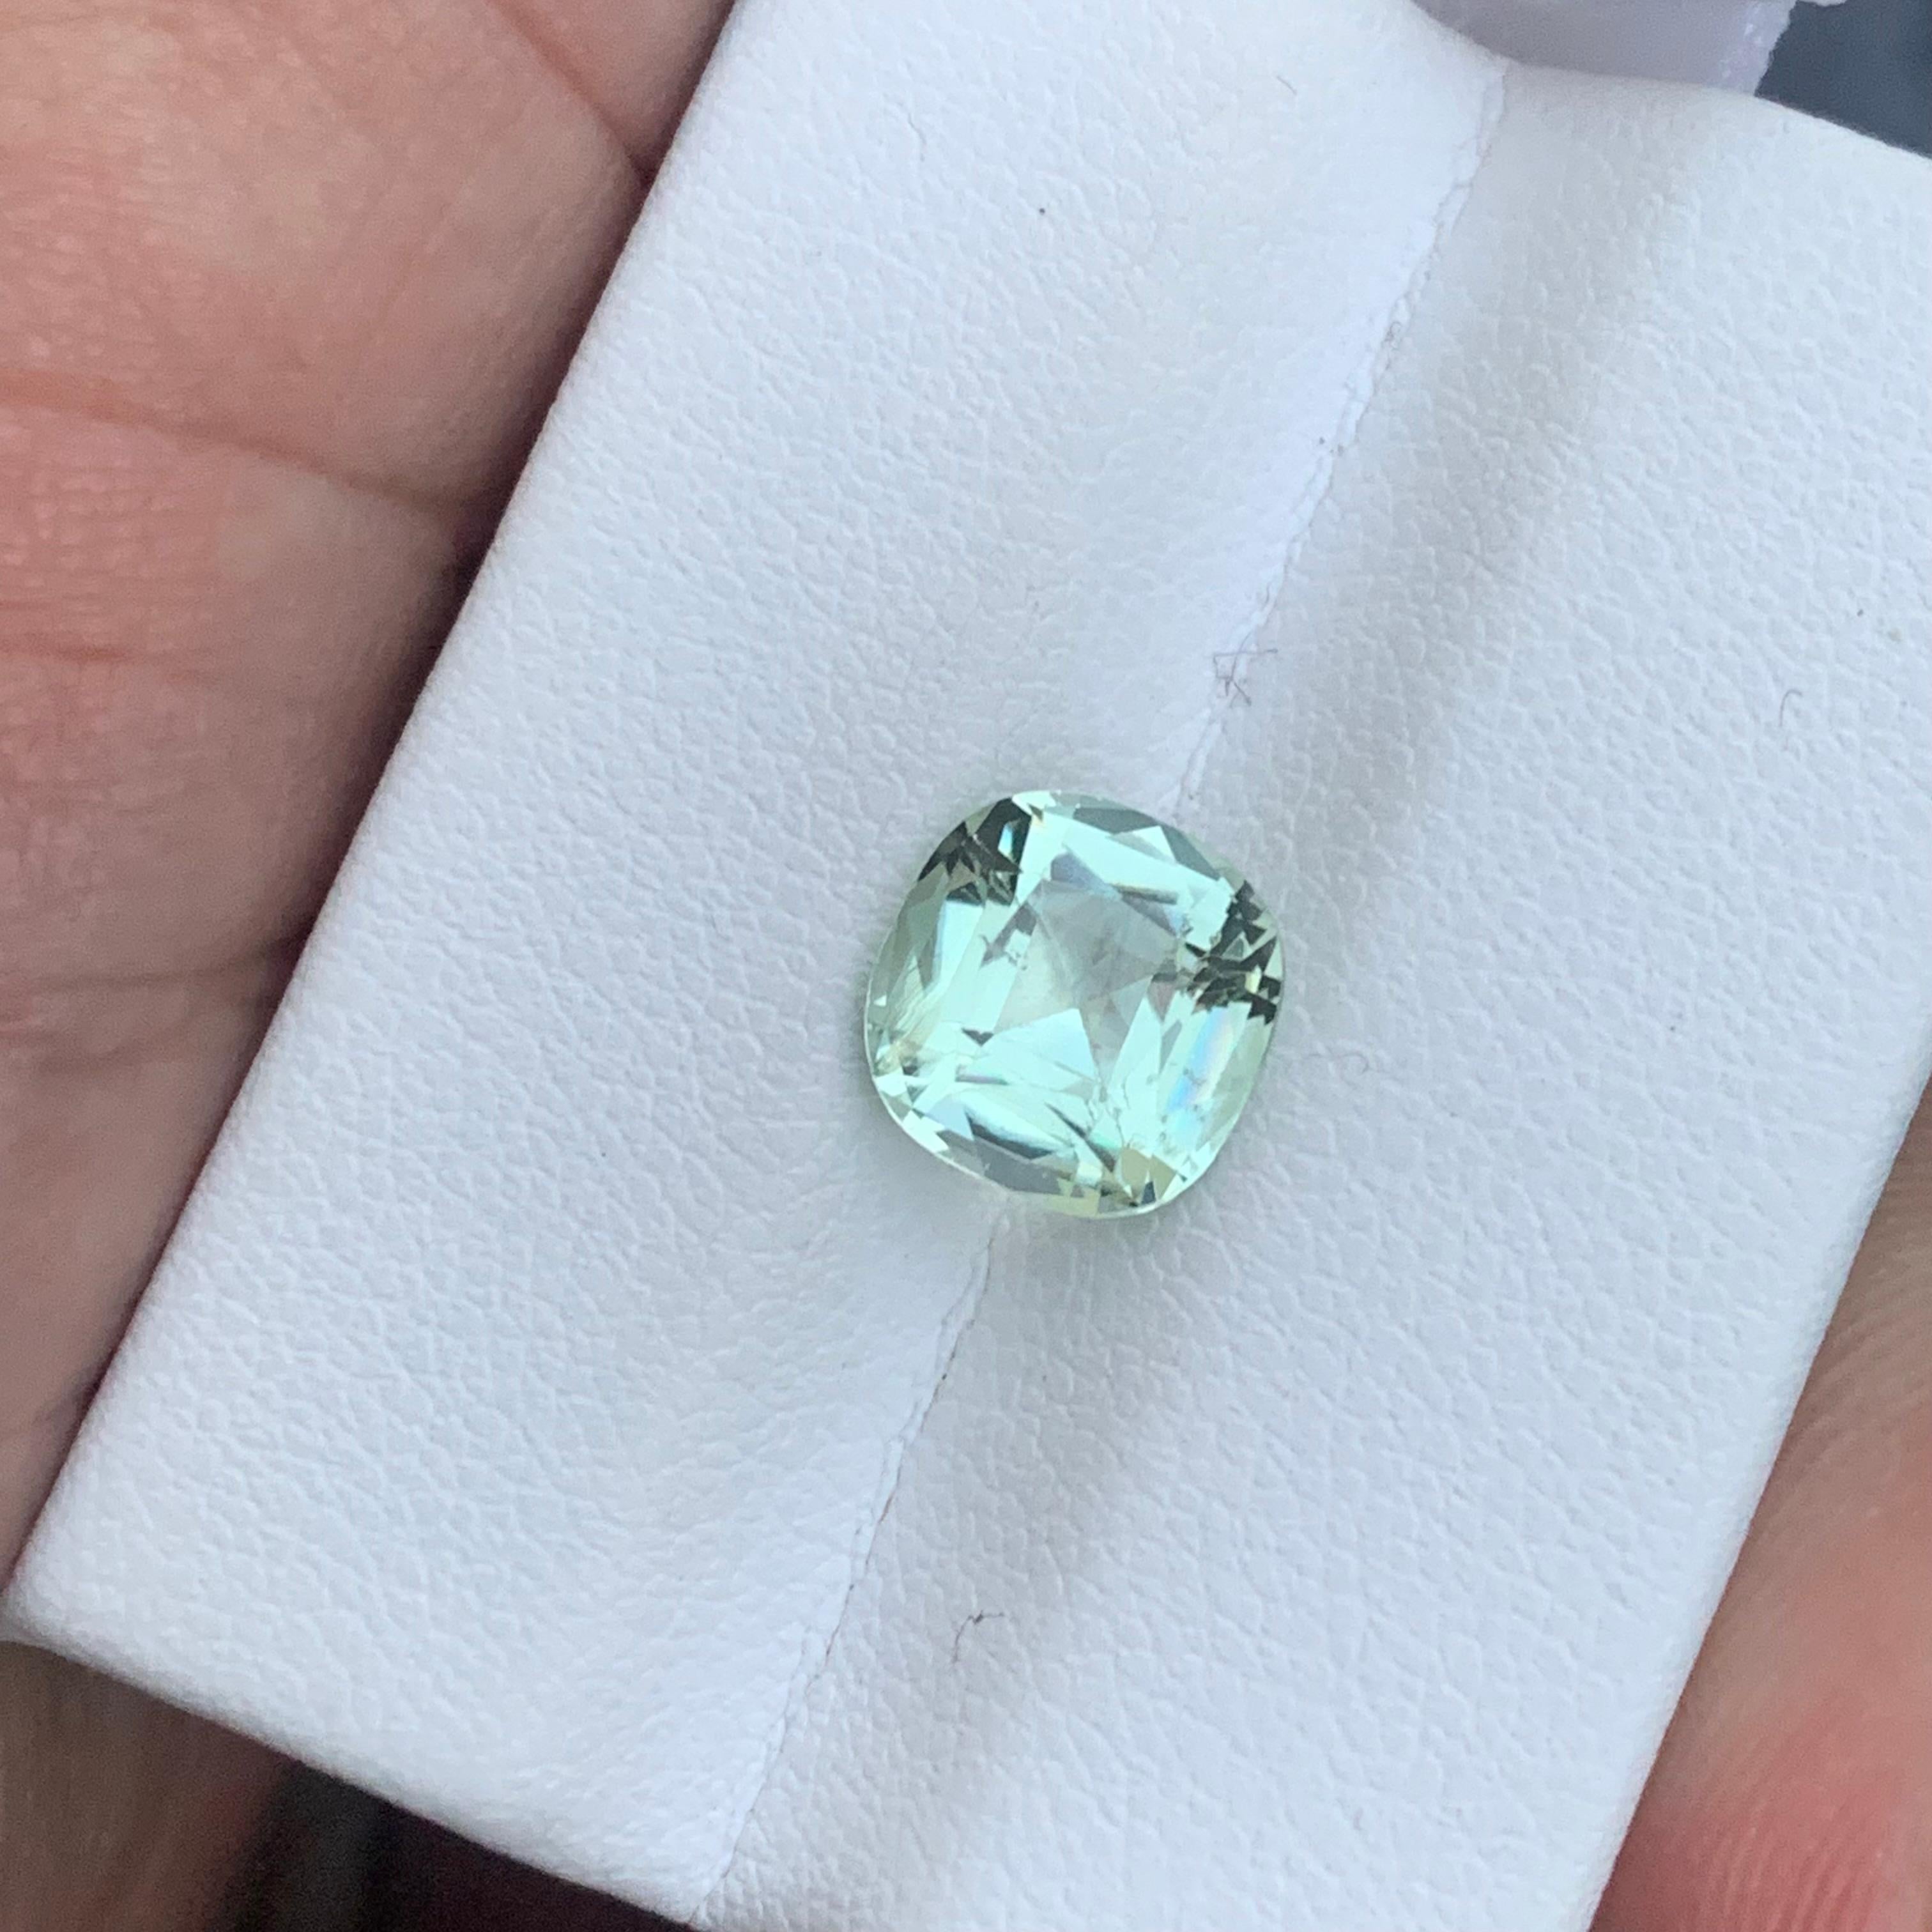 2.70 Carat Natural Loose Mint Green Tourmaline Cushion Shape From Afghan Mine For Sale 2